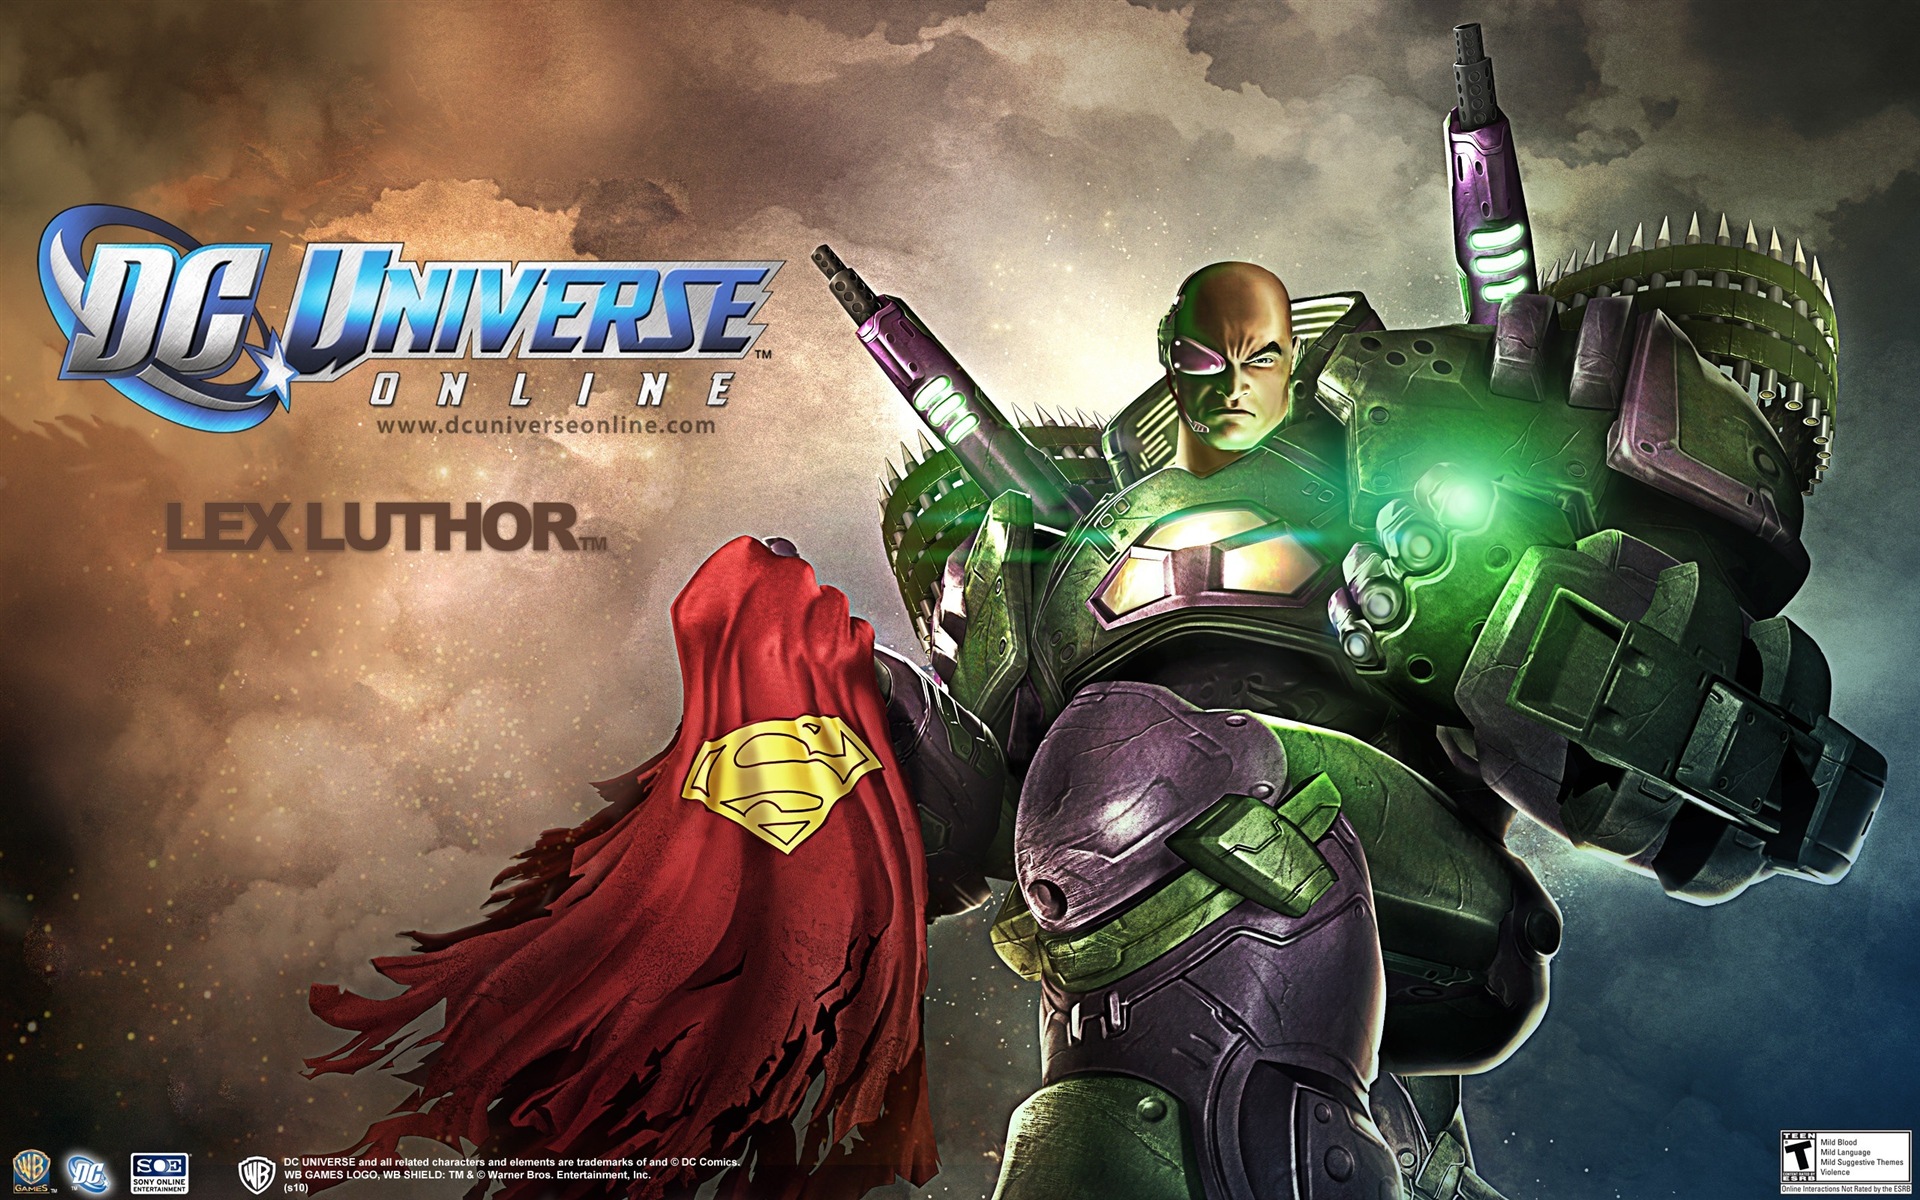 DC Universe Online HD game wallpapers #19 - 1920x1200